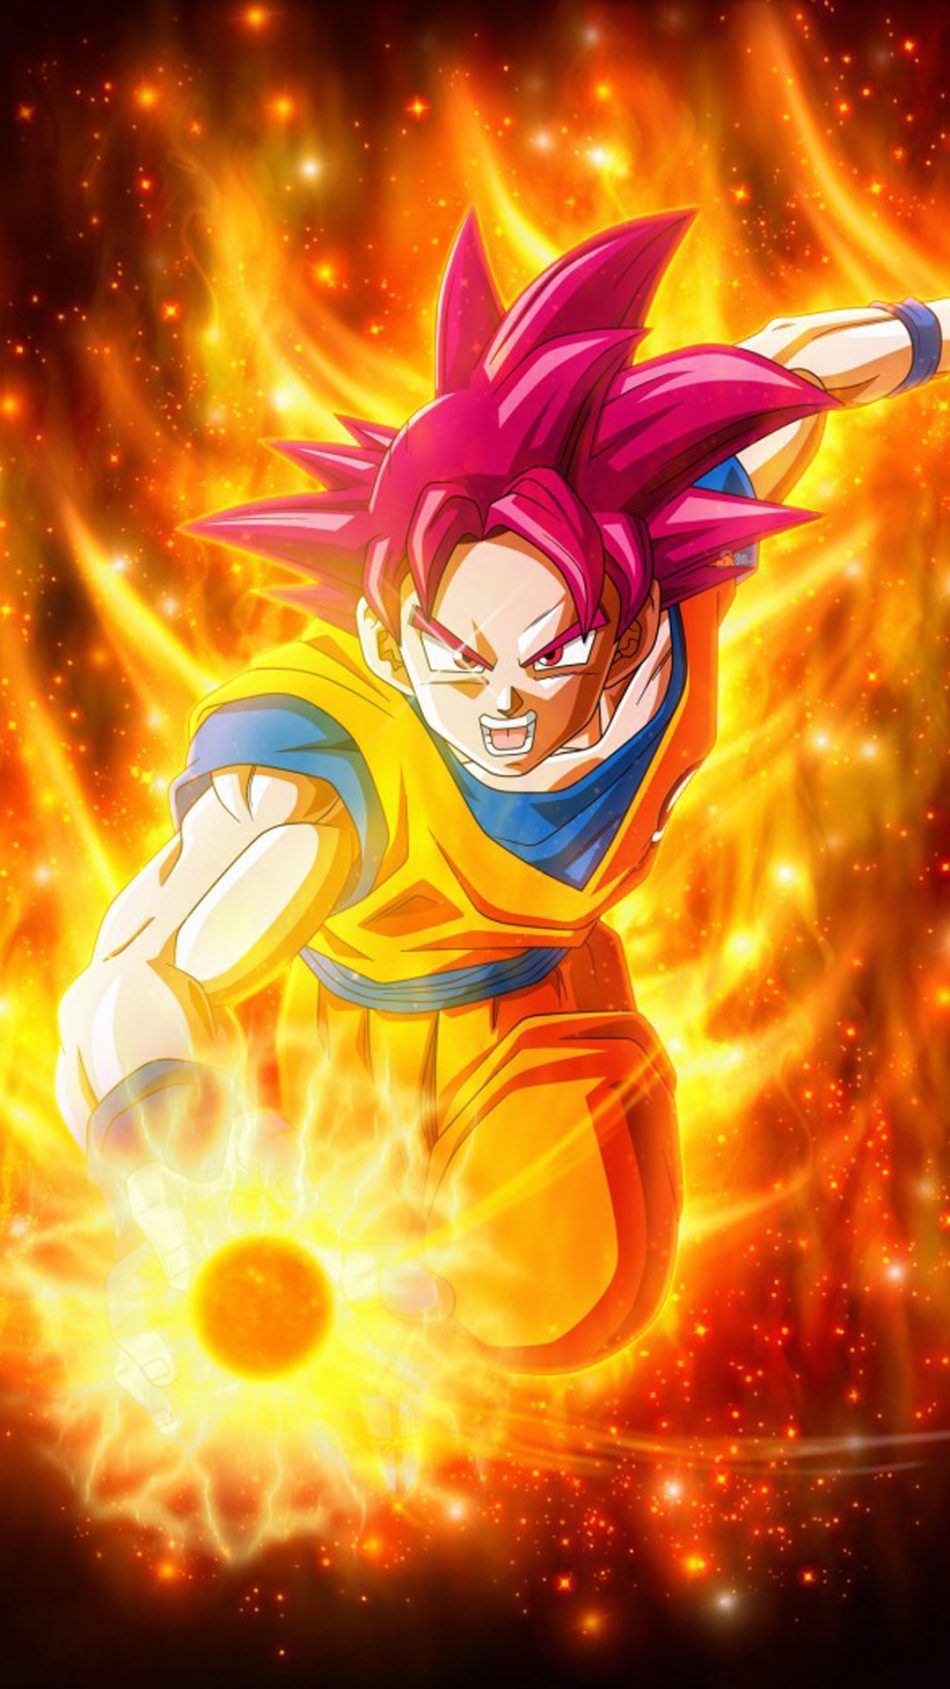 4k Android Dragon Ball Legends Wallpapers - Wallpaper Cave